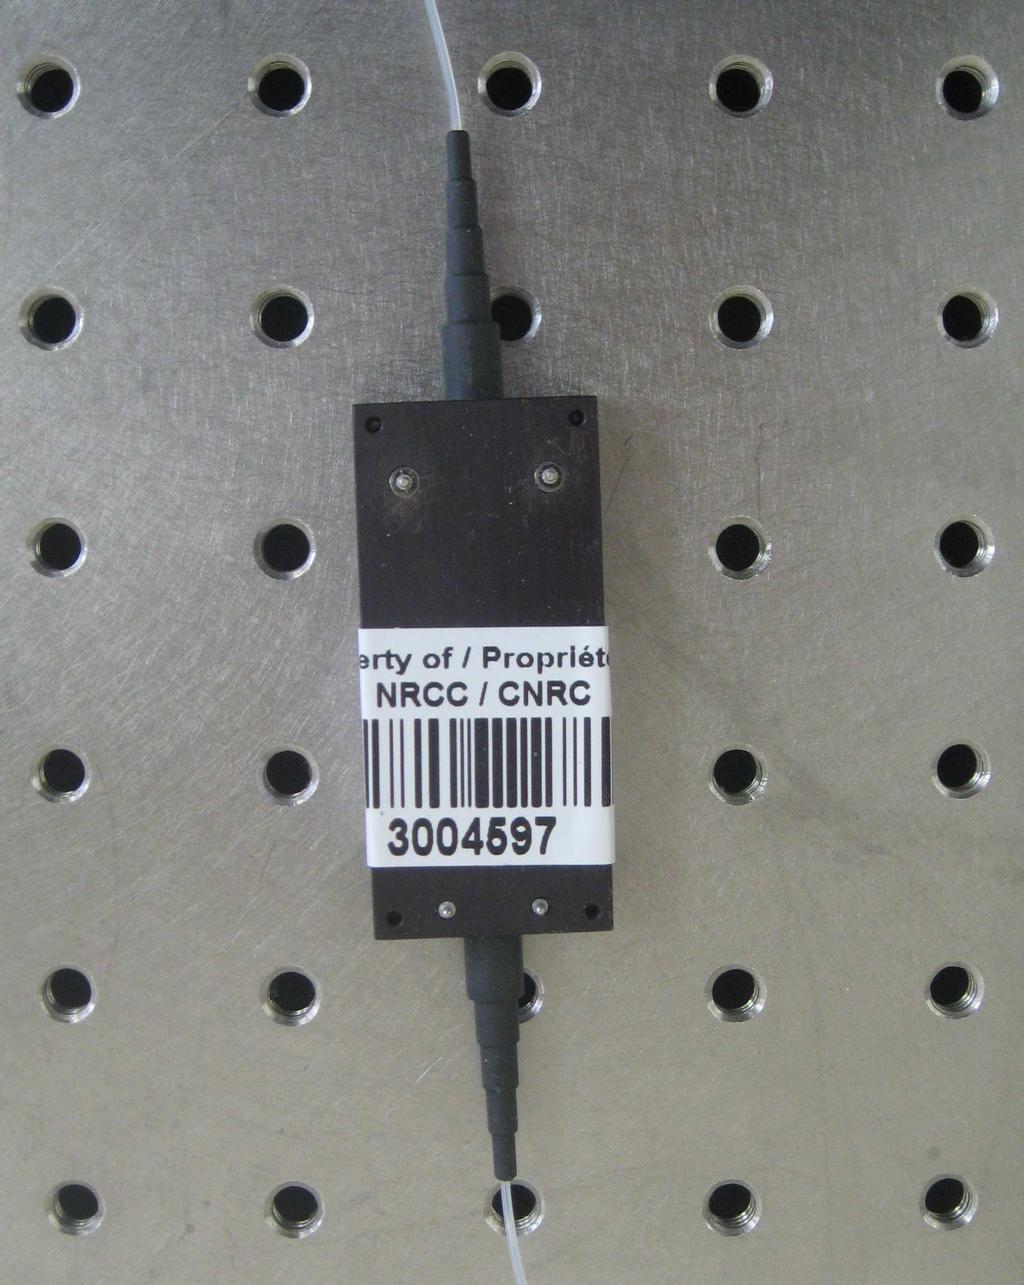 Figure 3.4: Fabry Perot interferometer and four channel bandpass filter that are used for measurements.